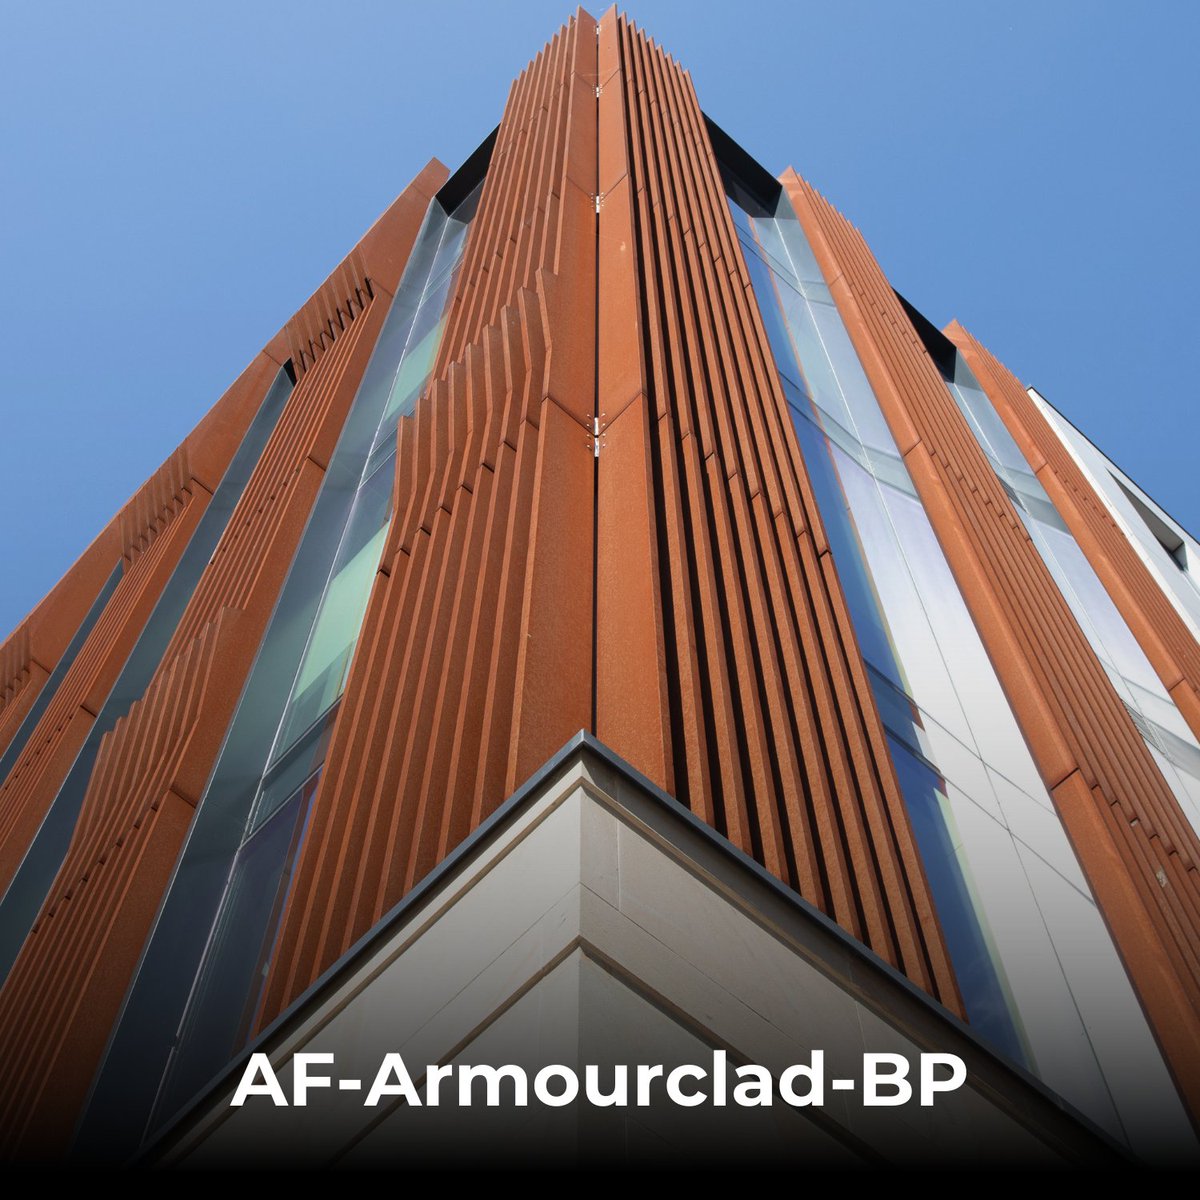 AF-Armourclad-BP Have you got a unique metal cladding design in mind for your next project? Armourclad Bespoke Panels can be provided based on your design, so please speak to a member of our team on 01925 943 660 if you would like to discuss your ideas with us.